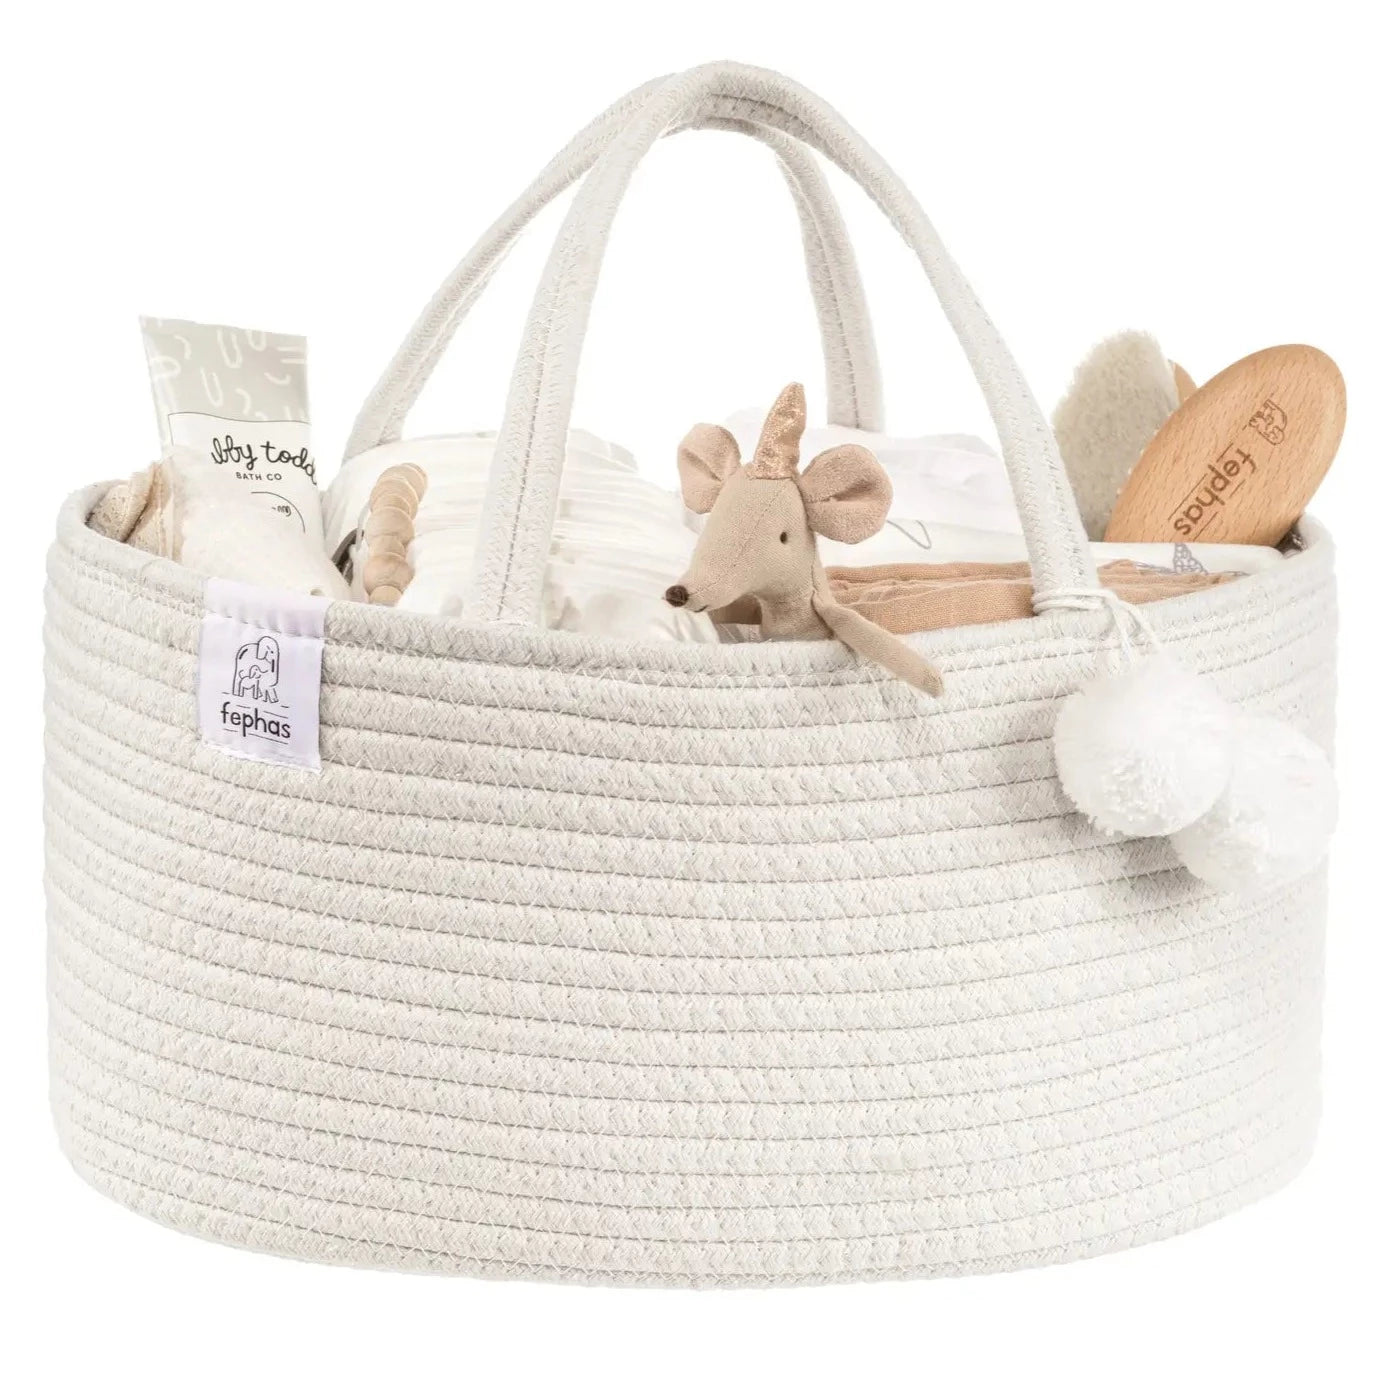 fephas cotton rope diaper caddy in off white